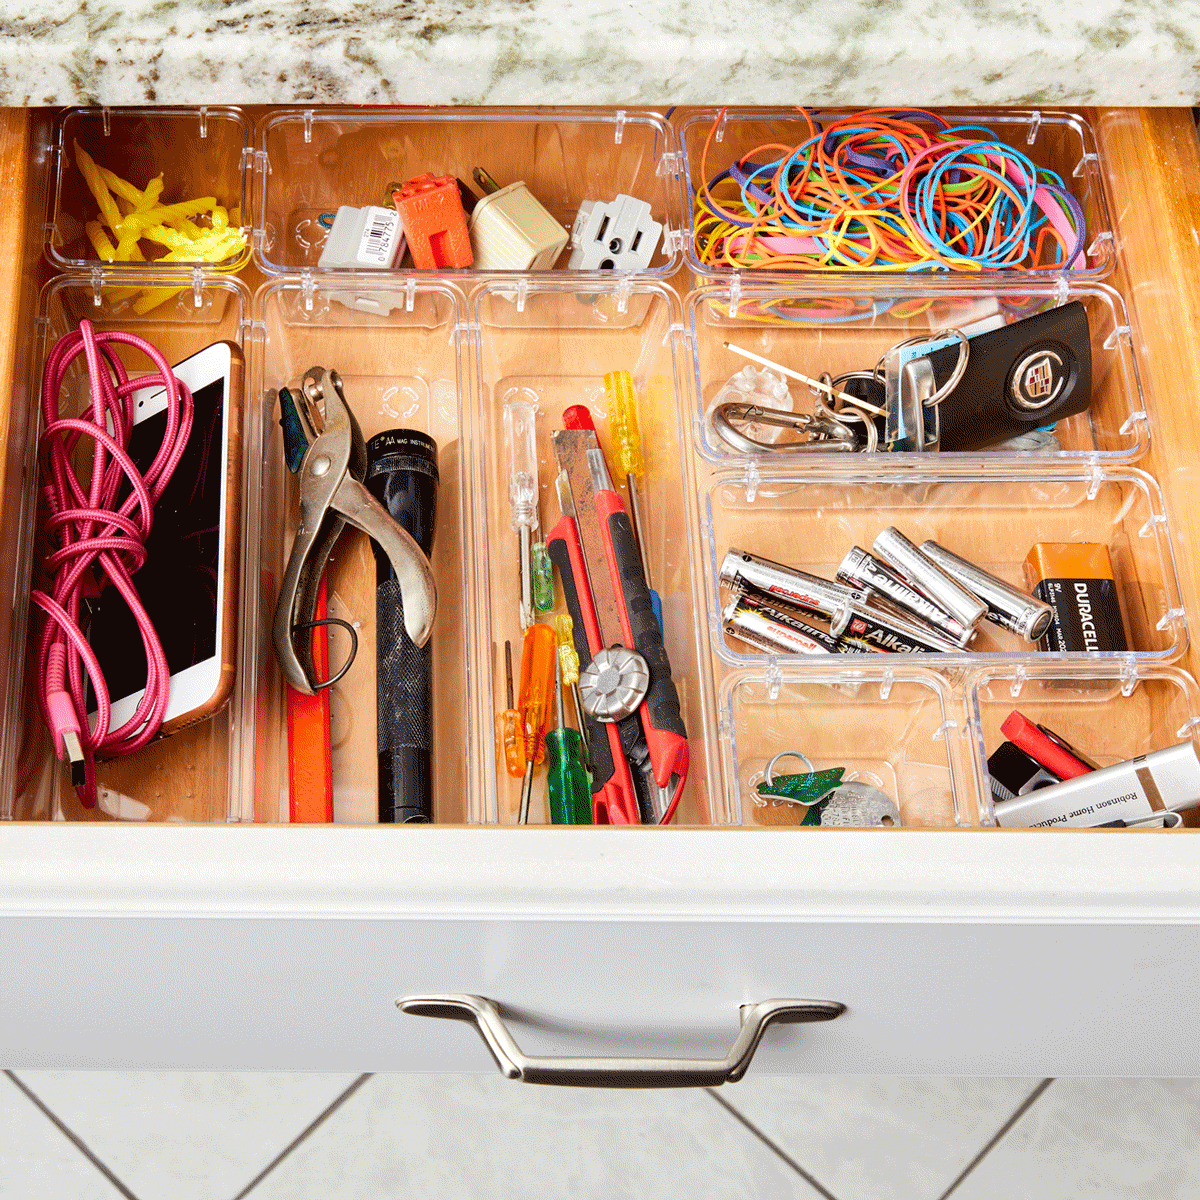 How to Organize a Junk Drawer So You Can Actually Find What You’re Looking For